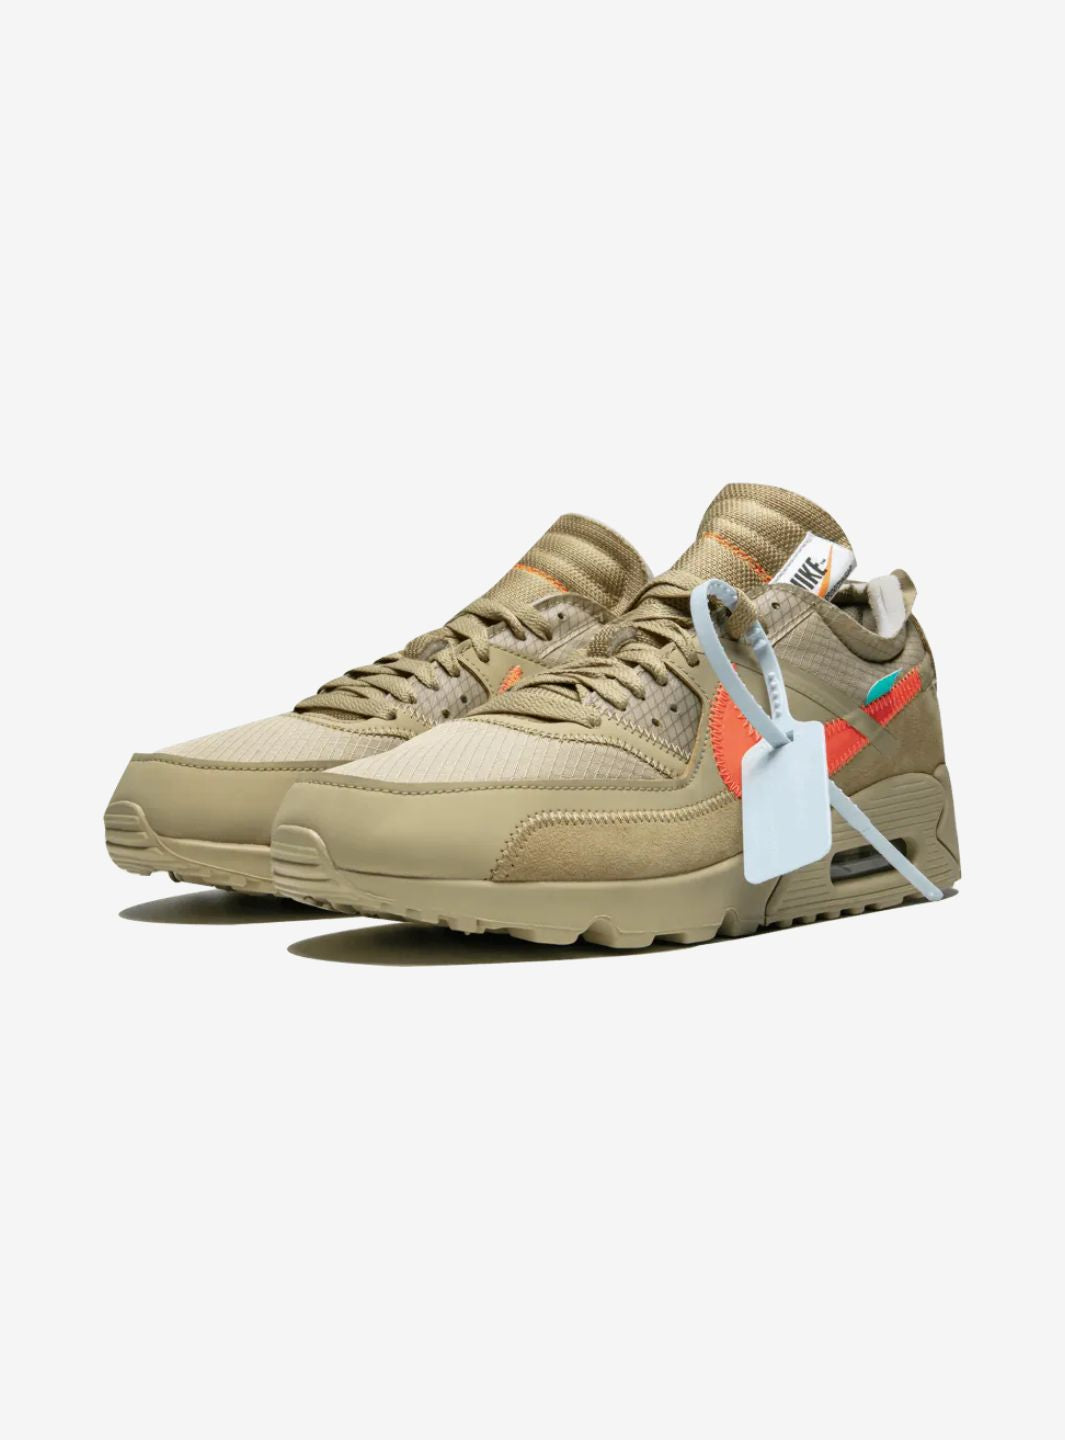 Nike Air Max 90 Off-White Desert Ore - AA7293-200 | ResellZone